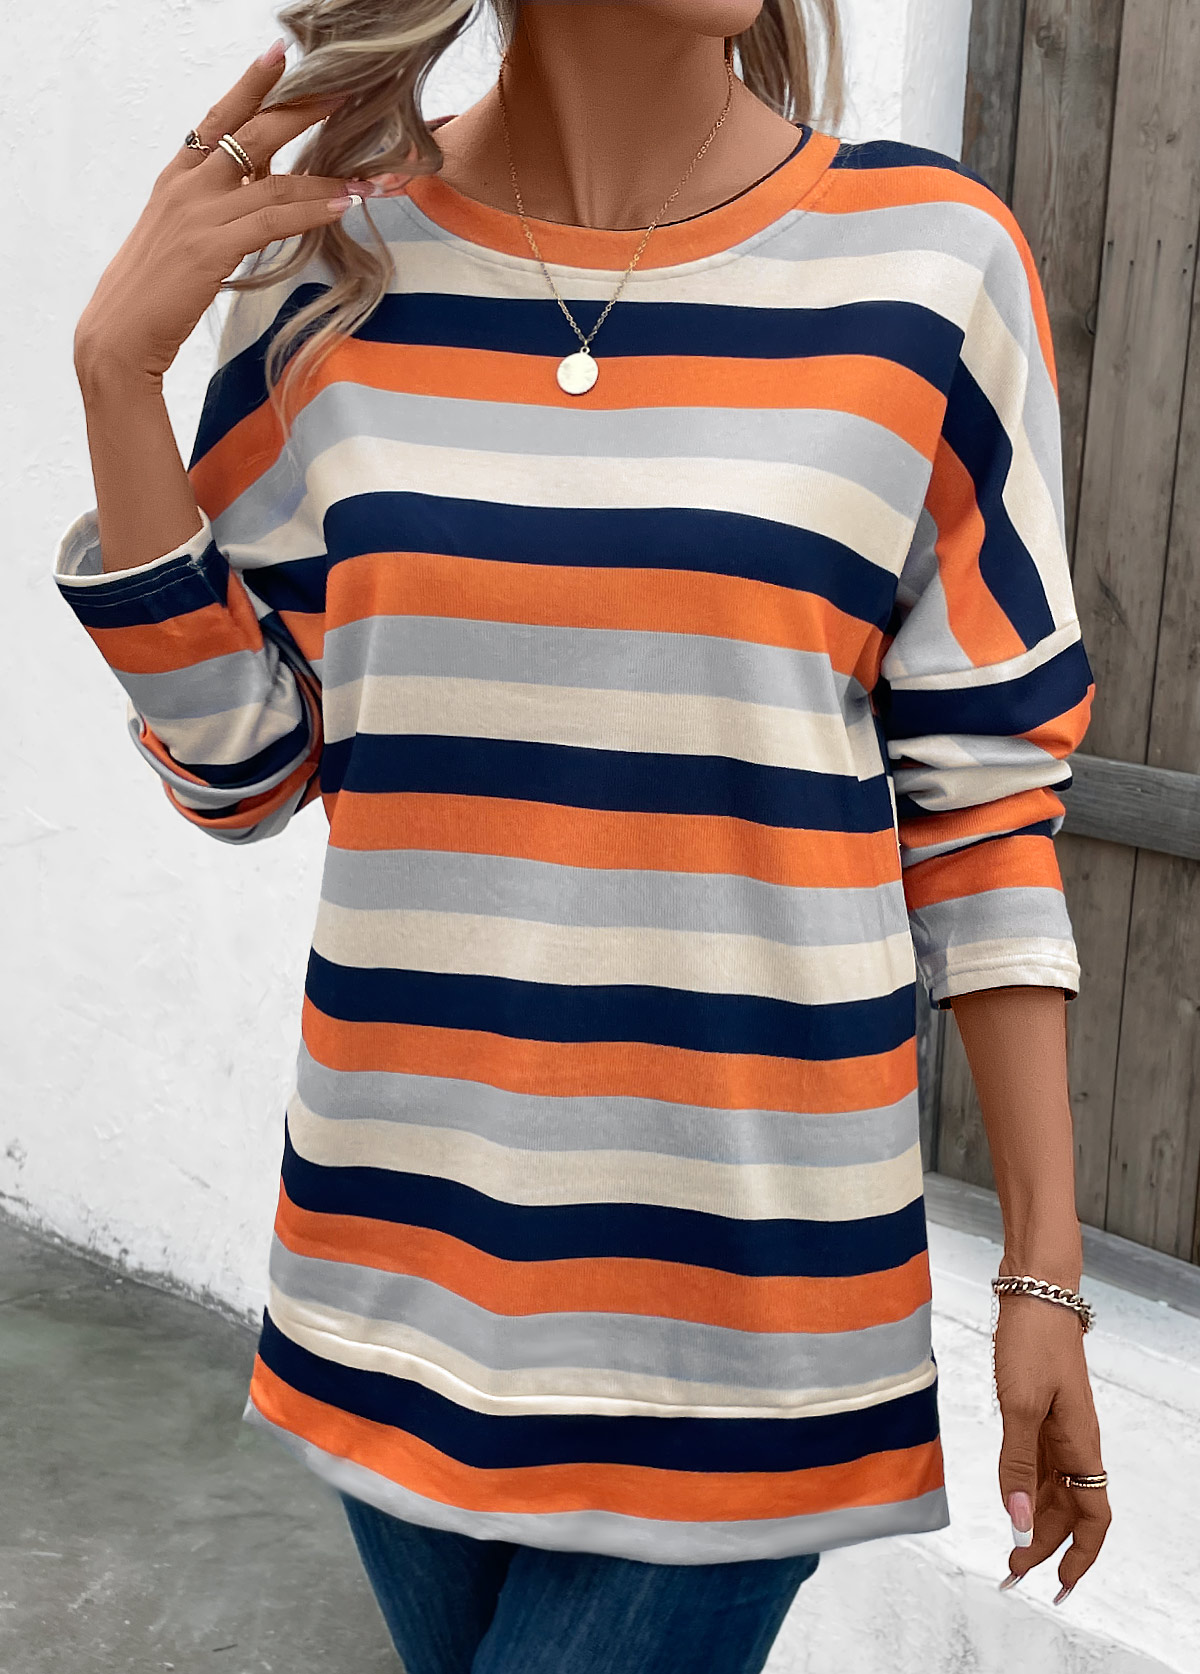 Patchwork Striped Multi Color Round Neck T Shirt